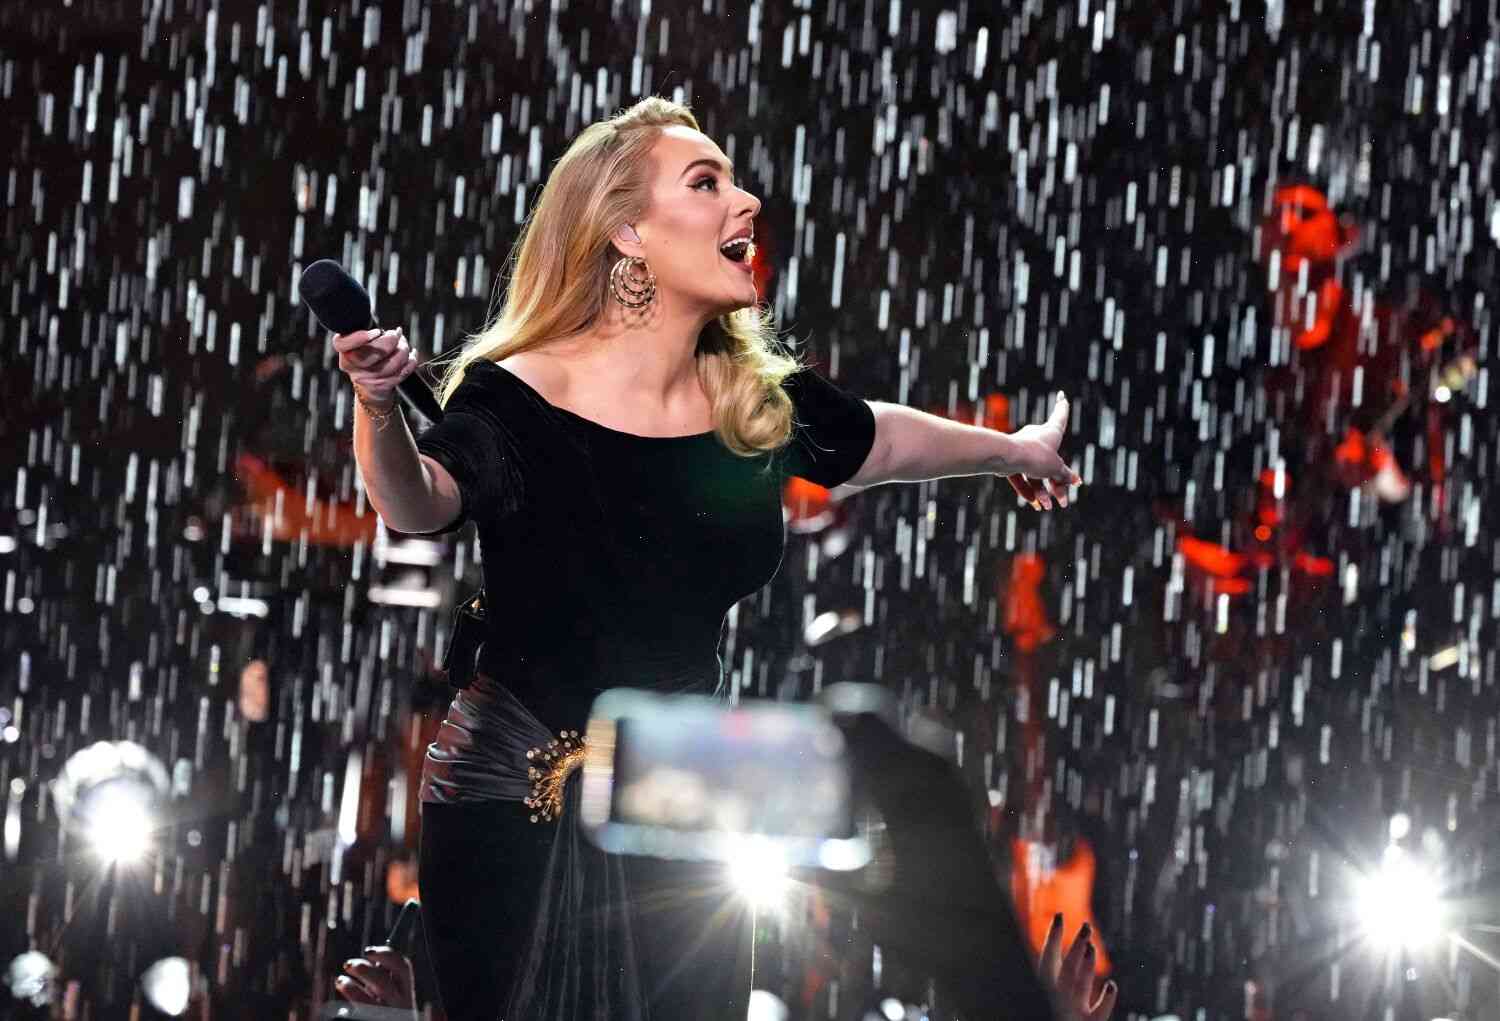 Adele Adele: The singer's journey to recovery